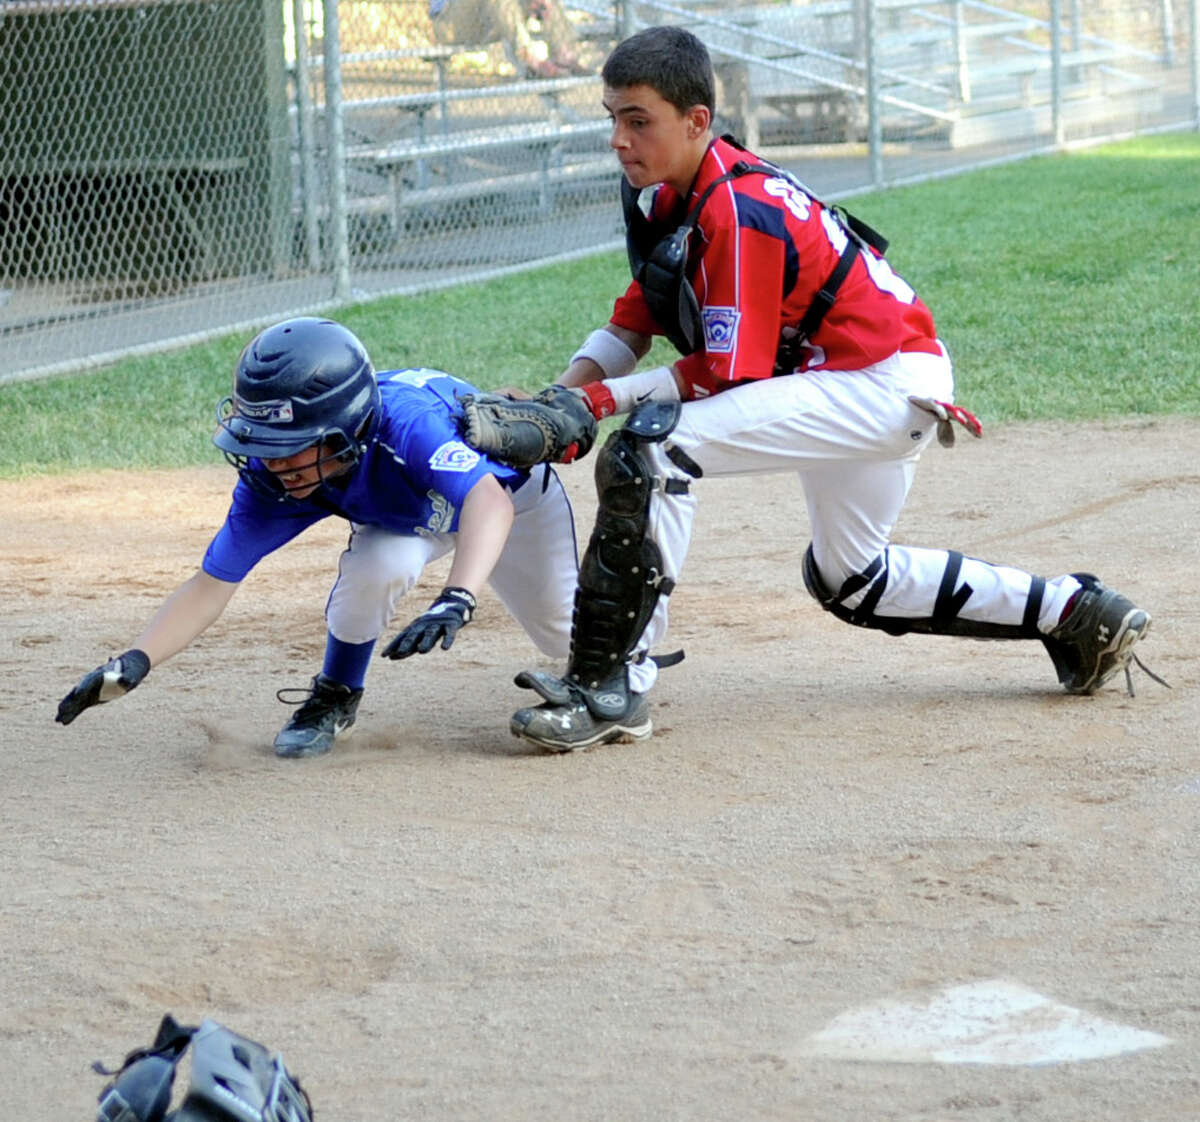 Stamford's Danny Collazo tags Darien's Justin Van de Graaf out near home plate during Friday's Little League game at McGuane Field in Darien on June 29, 2012.